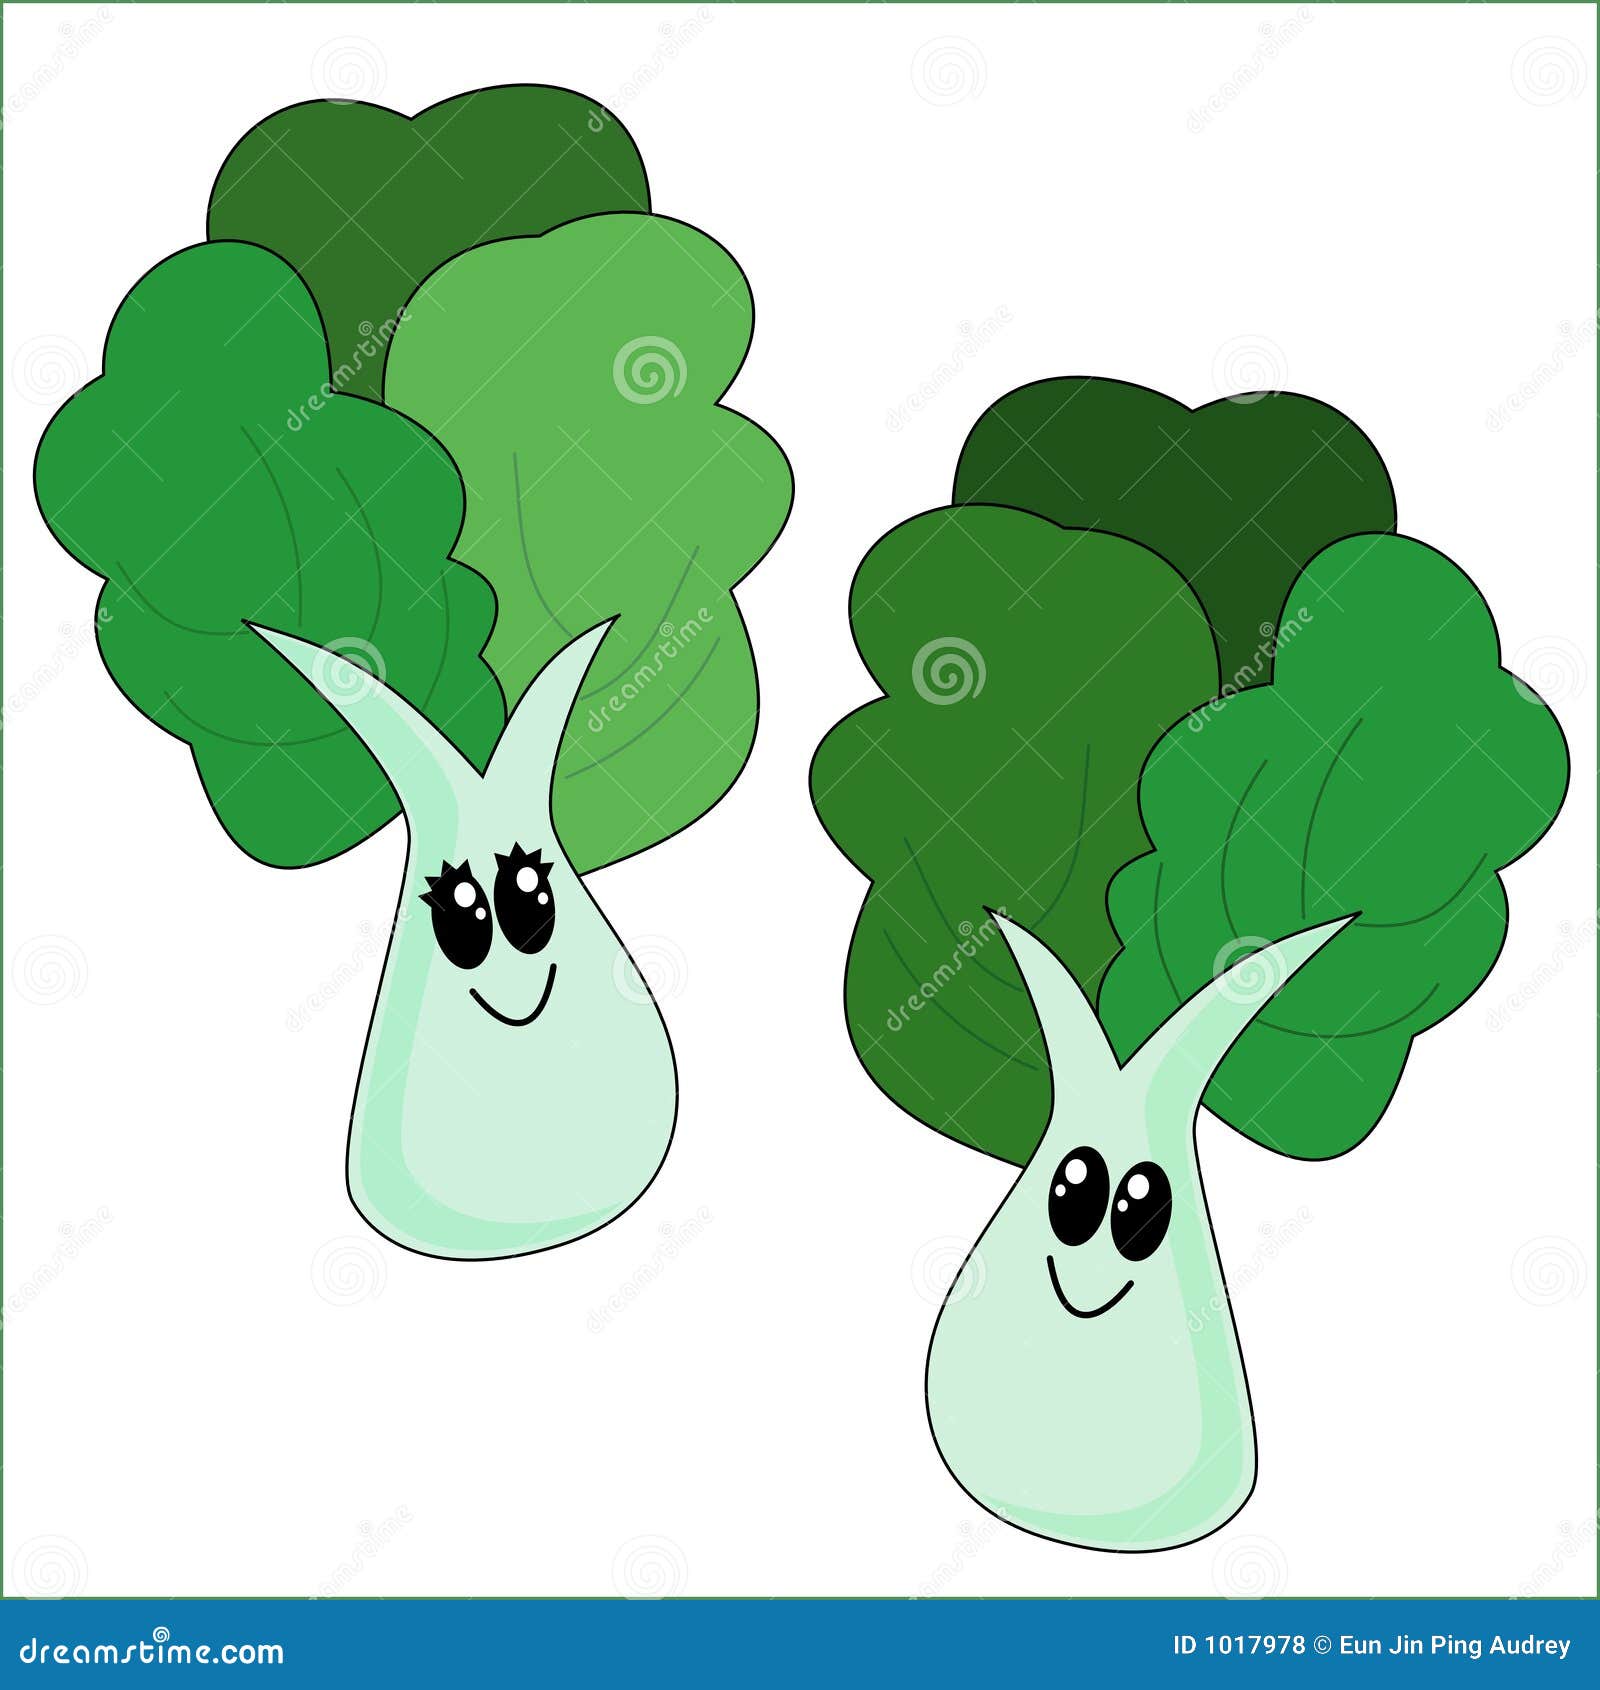 animated vegetables clipart - photo #20